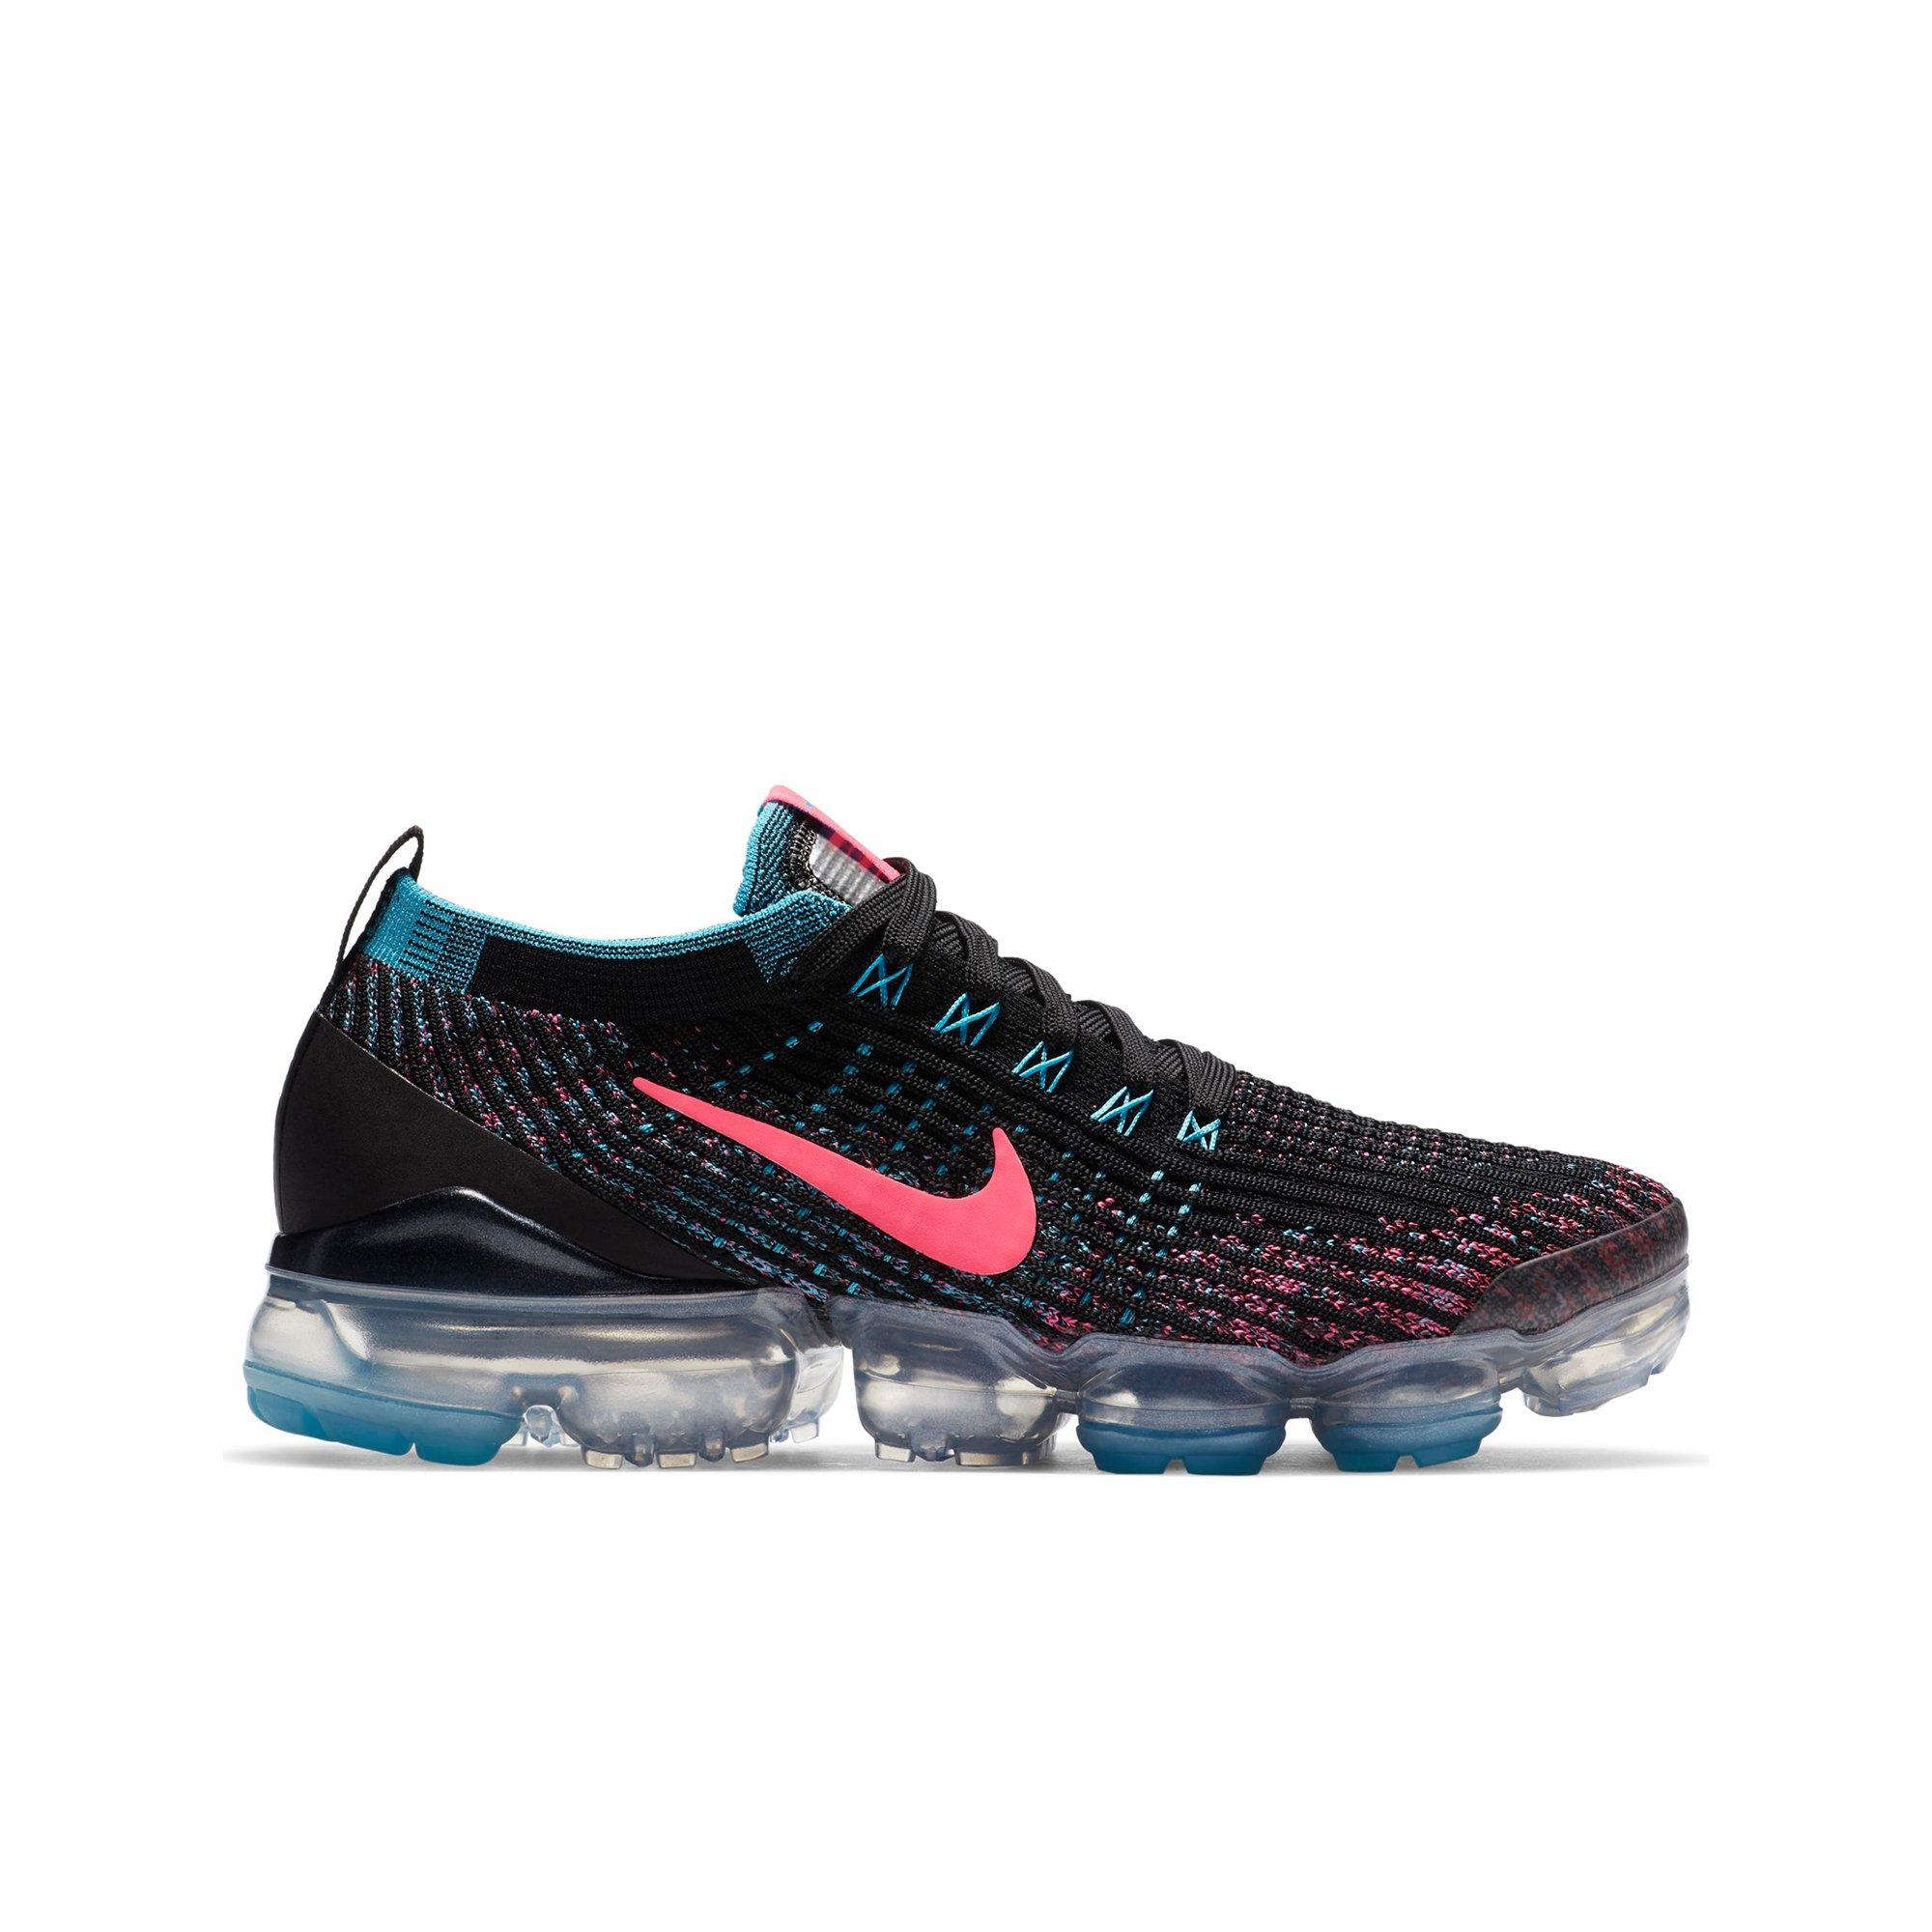 nike vapormax flyknit pink and black